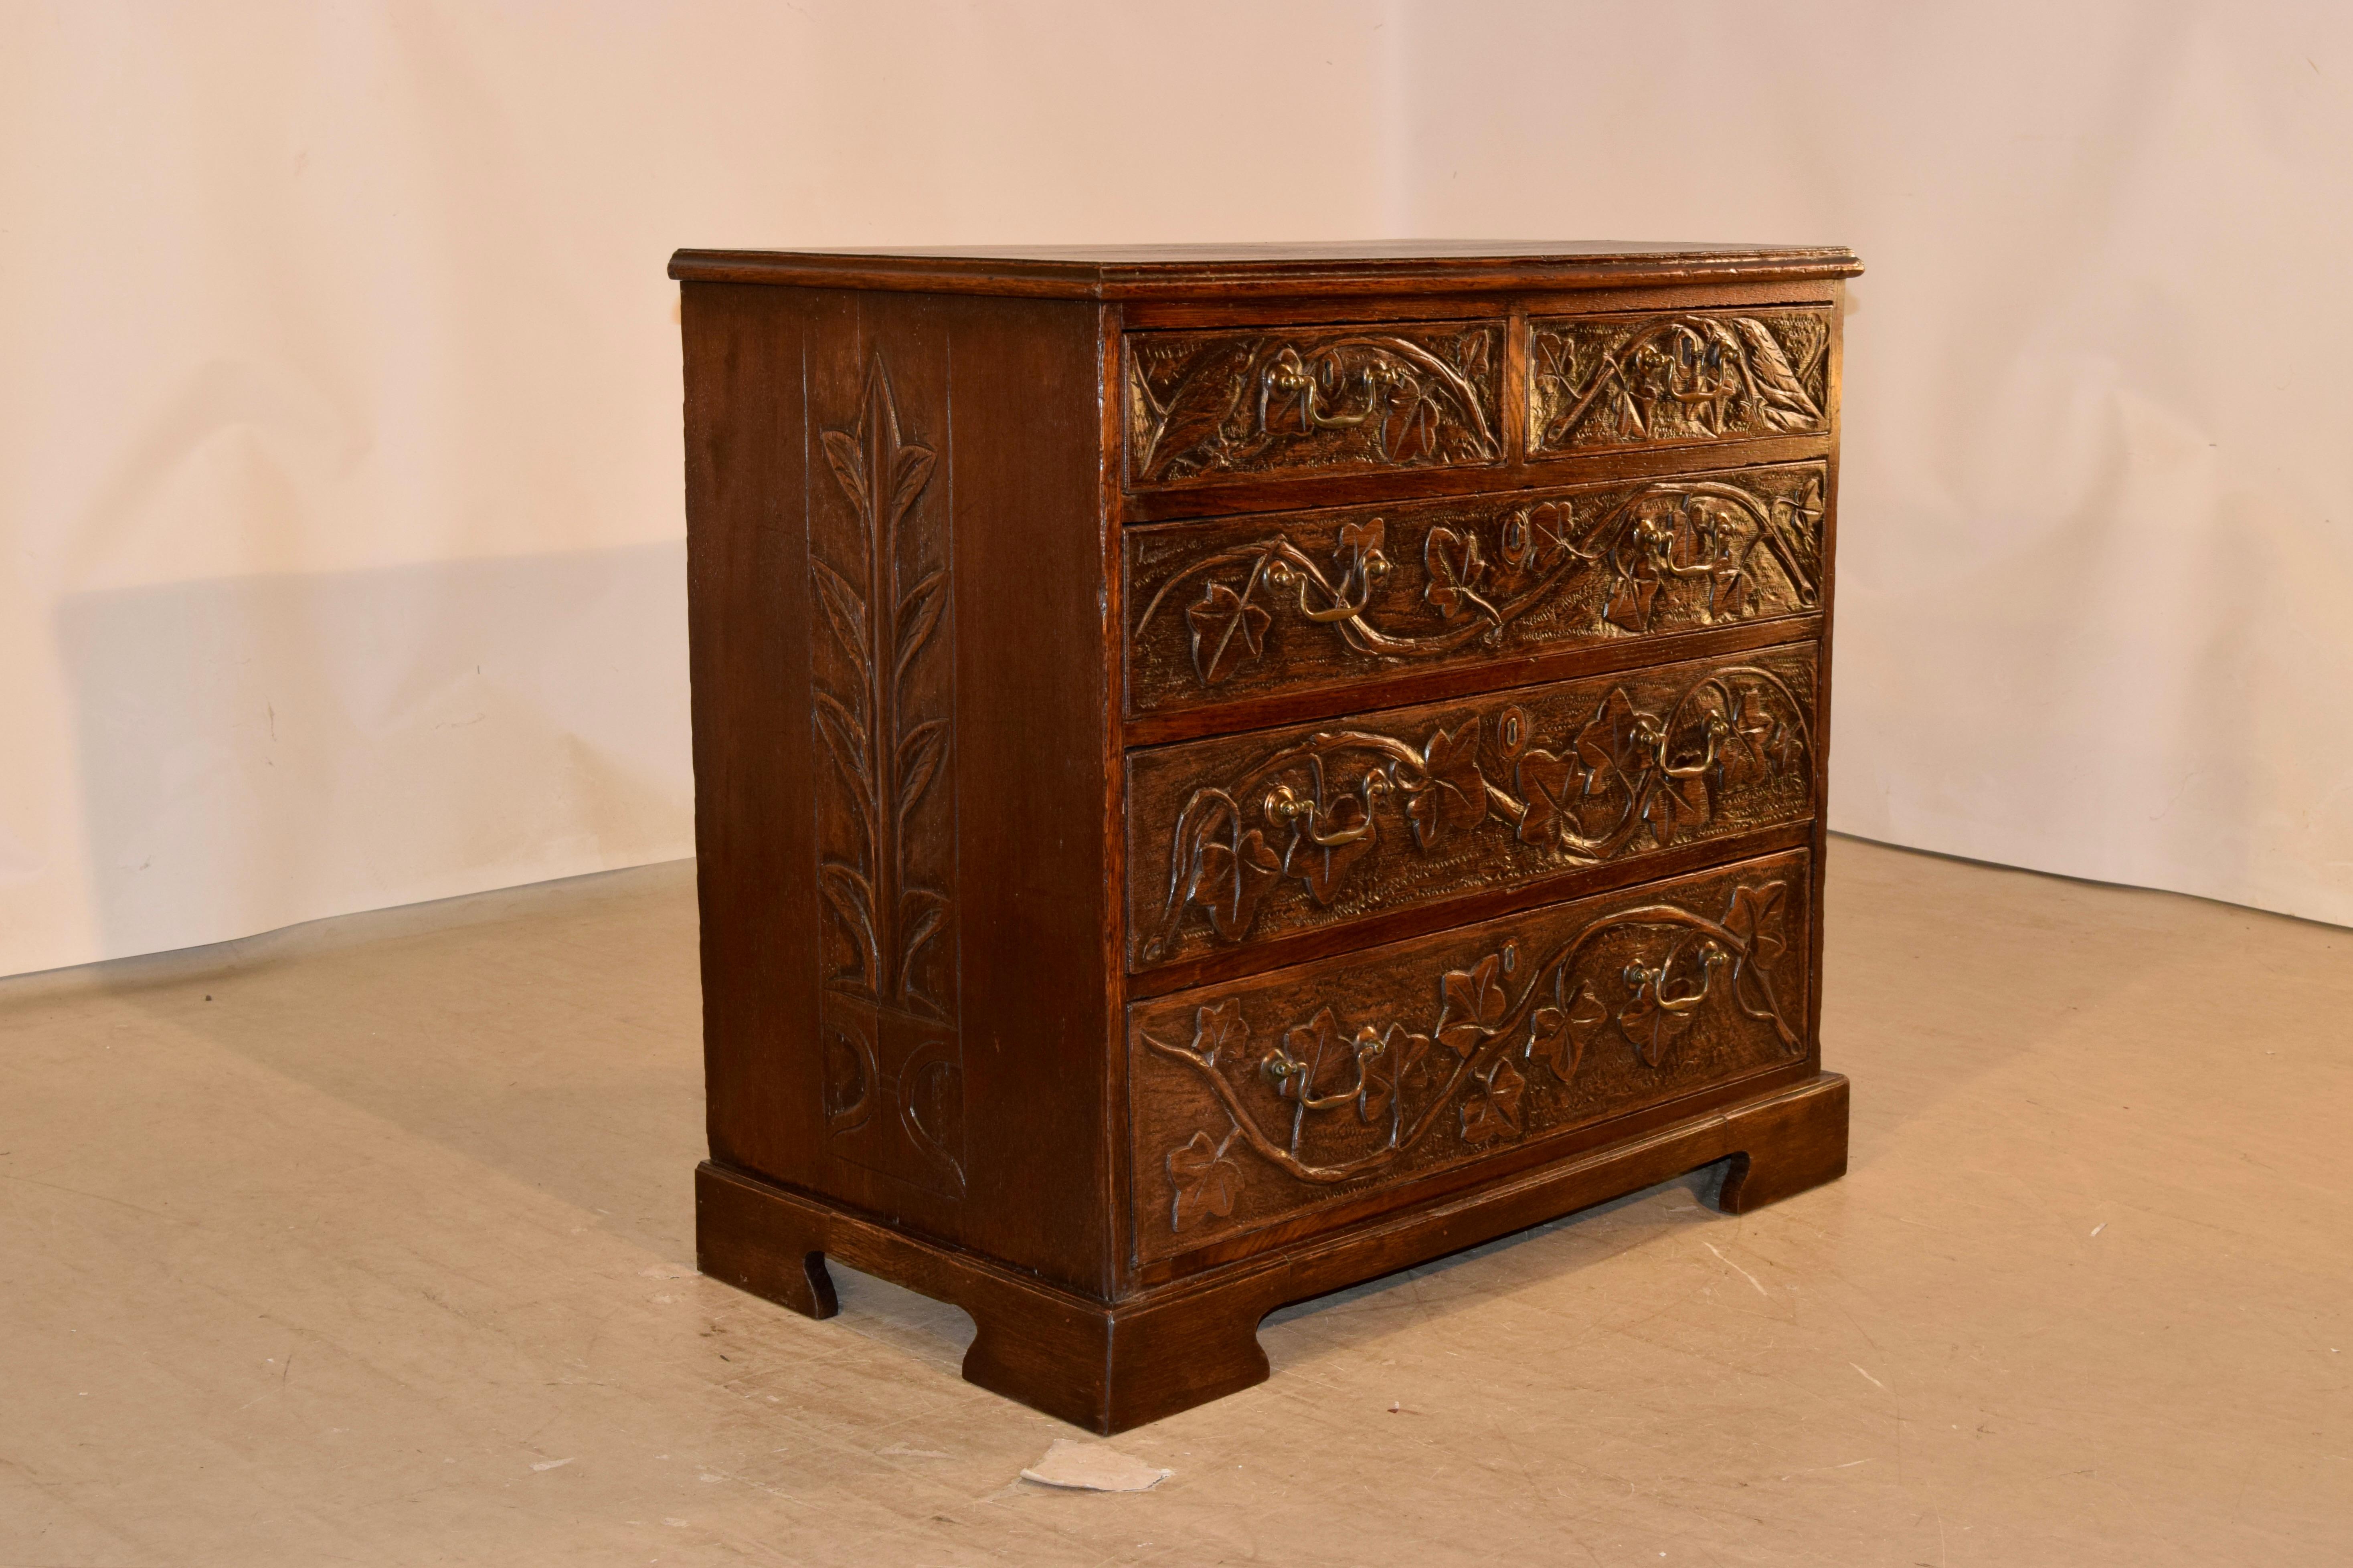 Circa 1800-1820 carved oak chest of drawers from England. The top has a lovely banded and beveled edge, over three board sides, with the center board decorated with hand carving of foliage on both sides. The front of the case has two over three